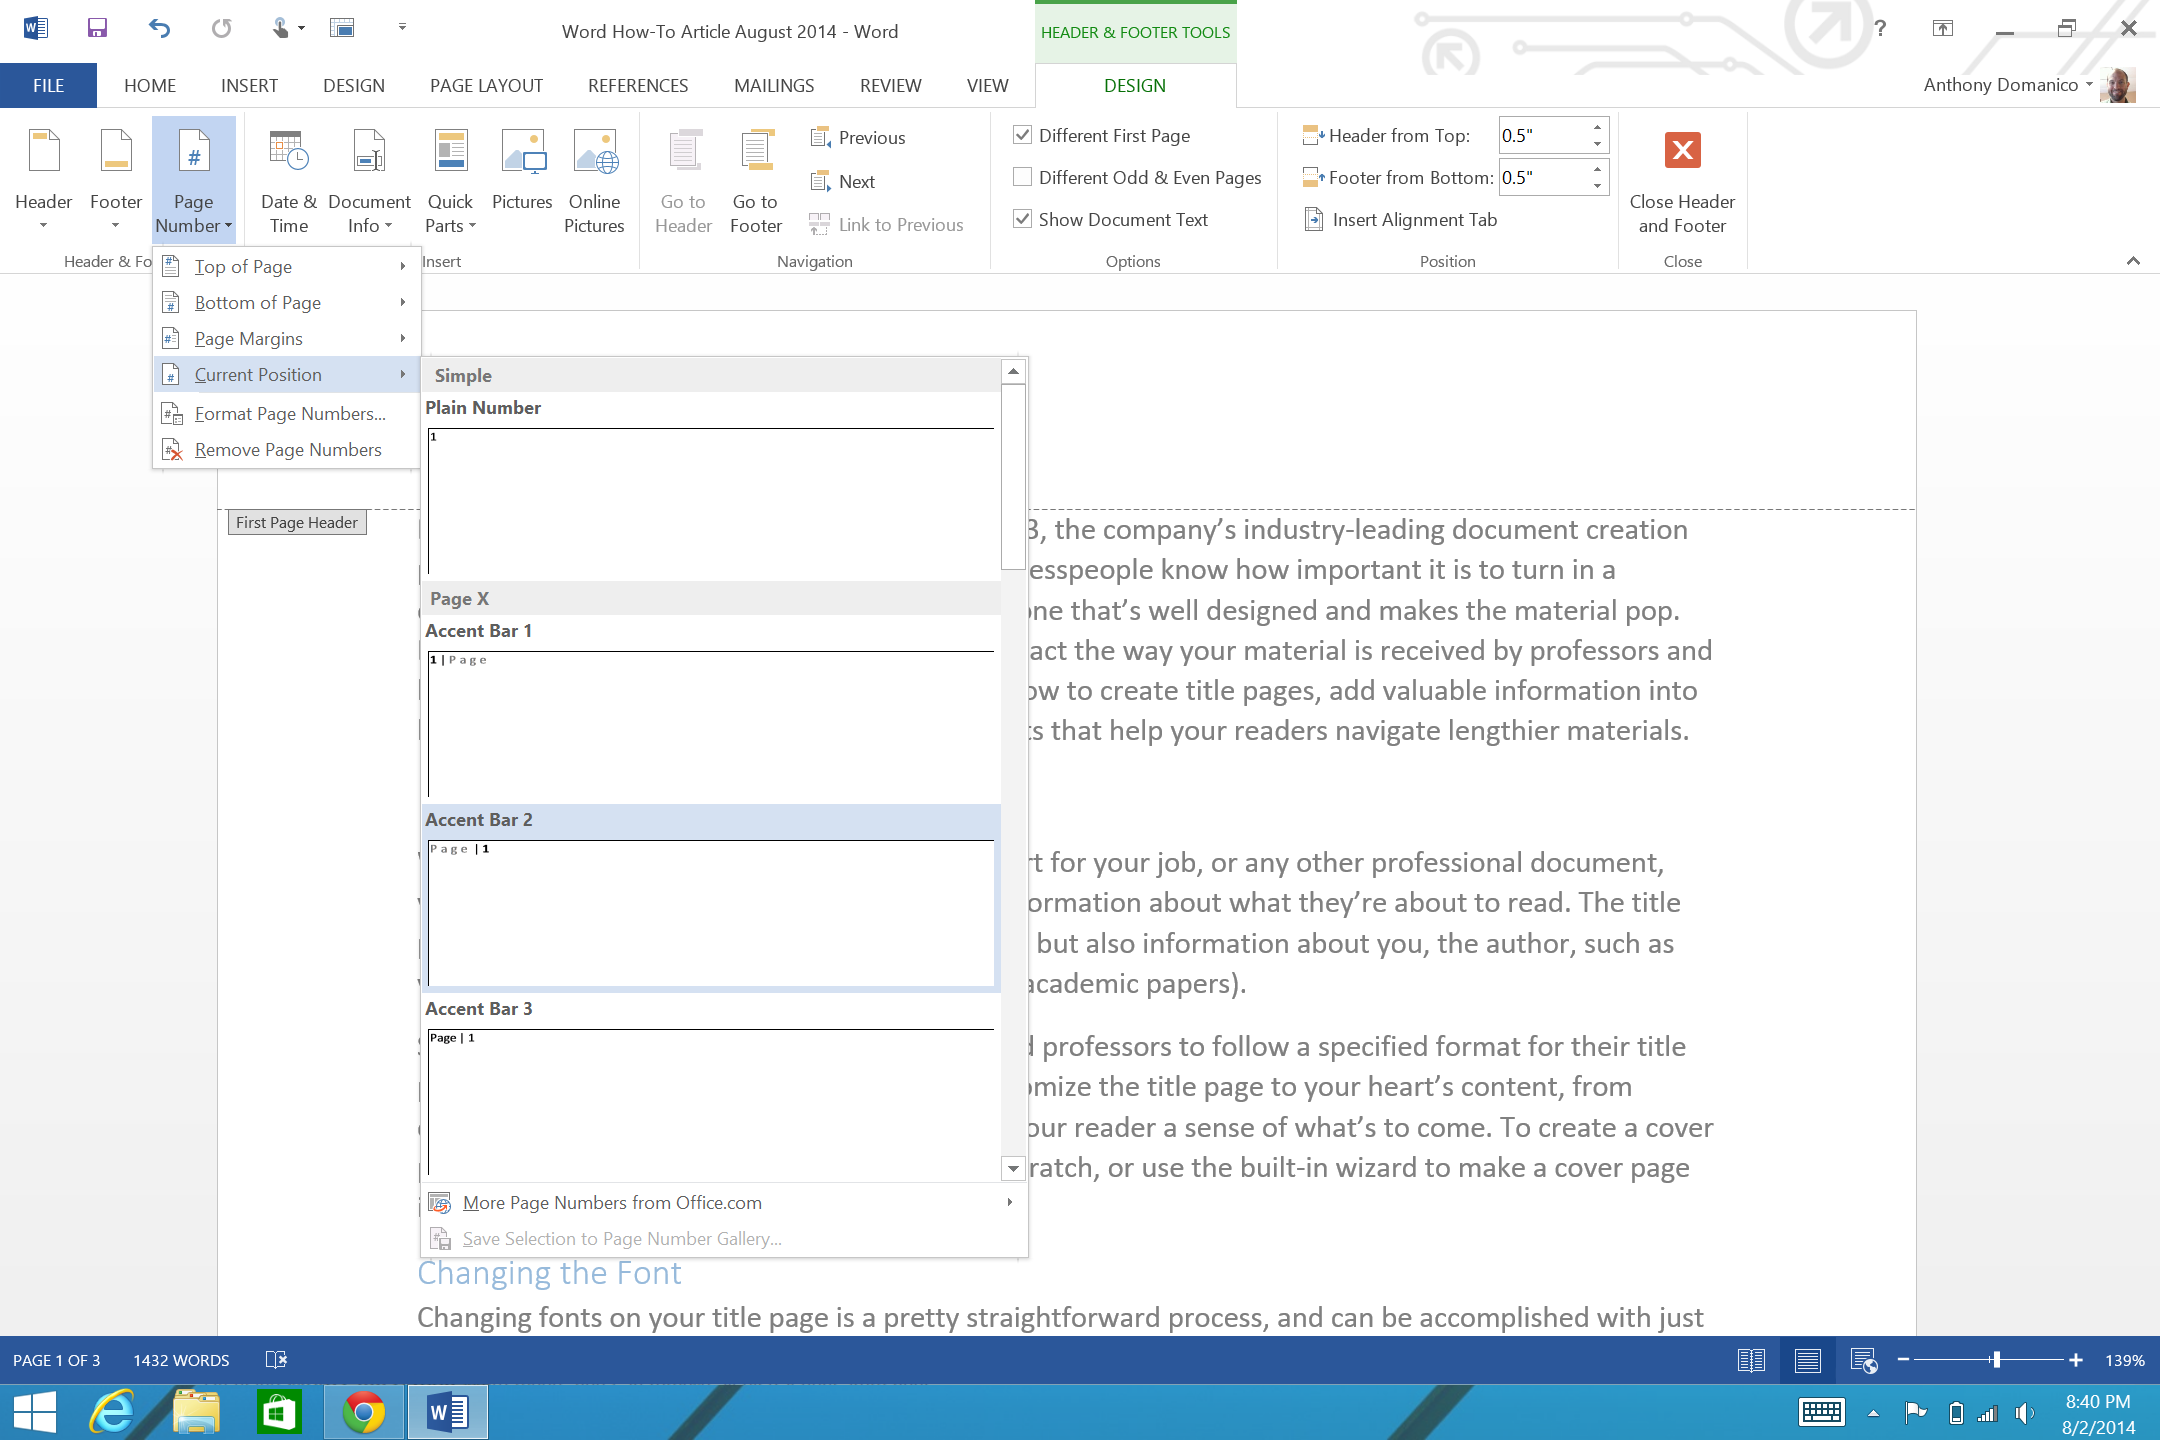 how do you show header only on first page in word document